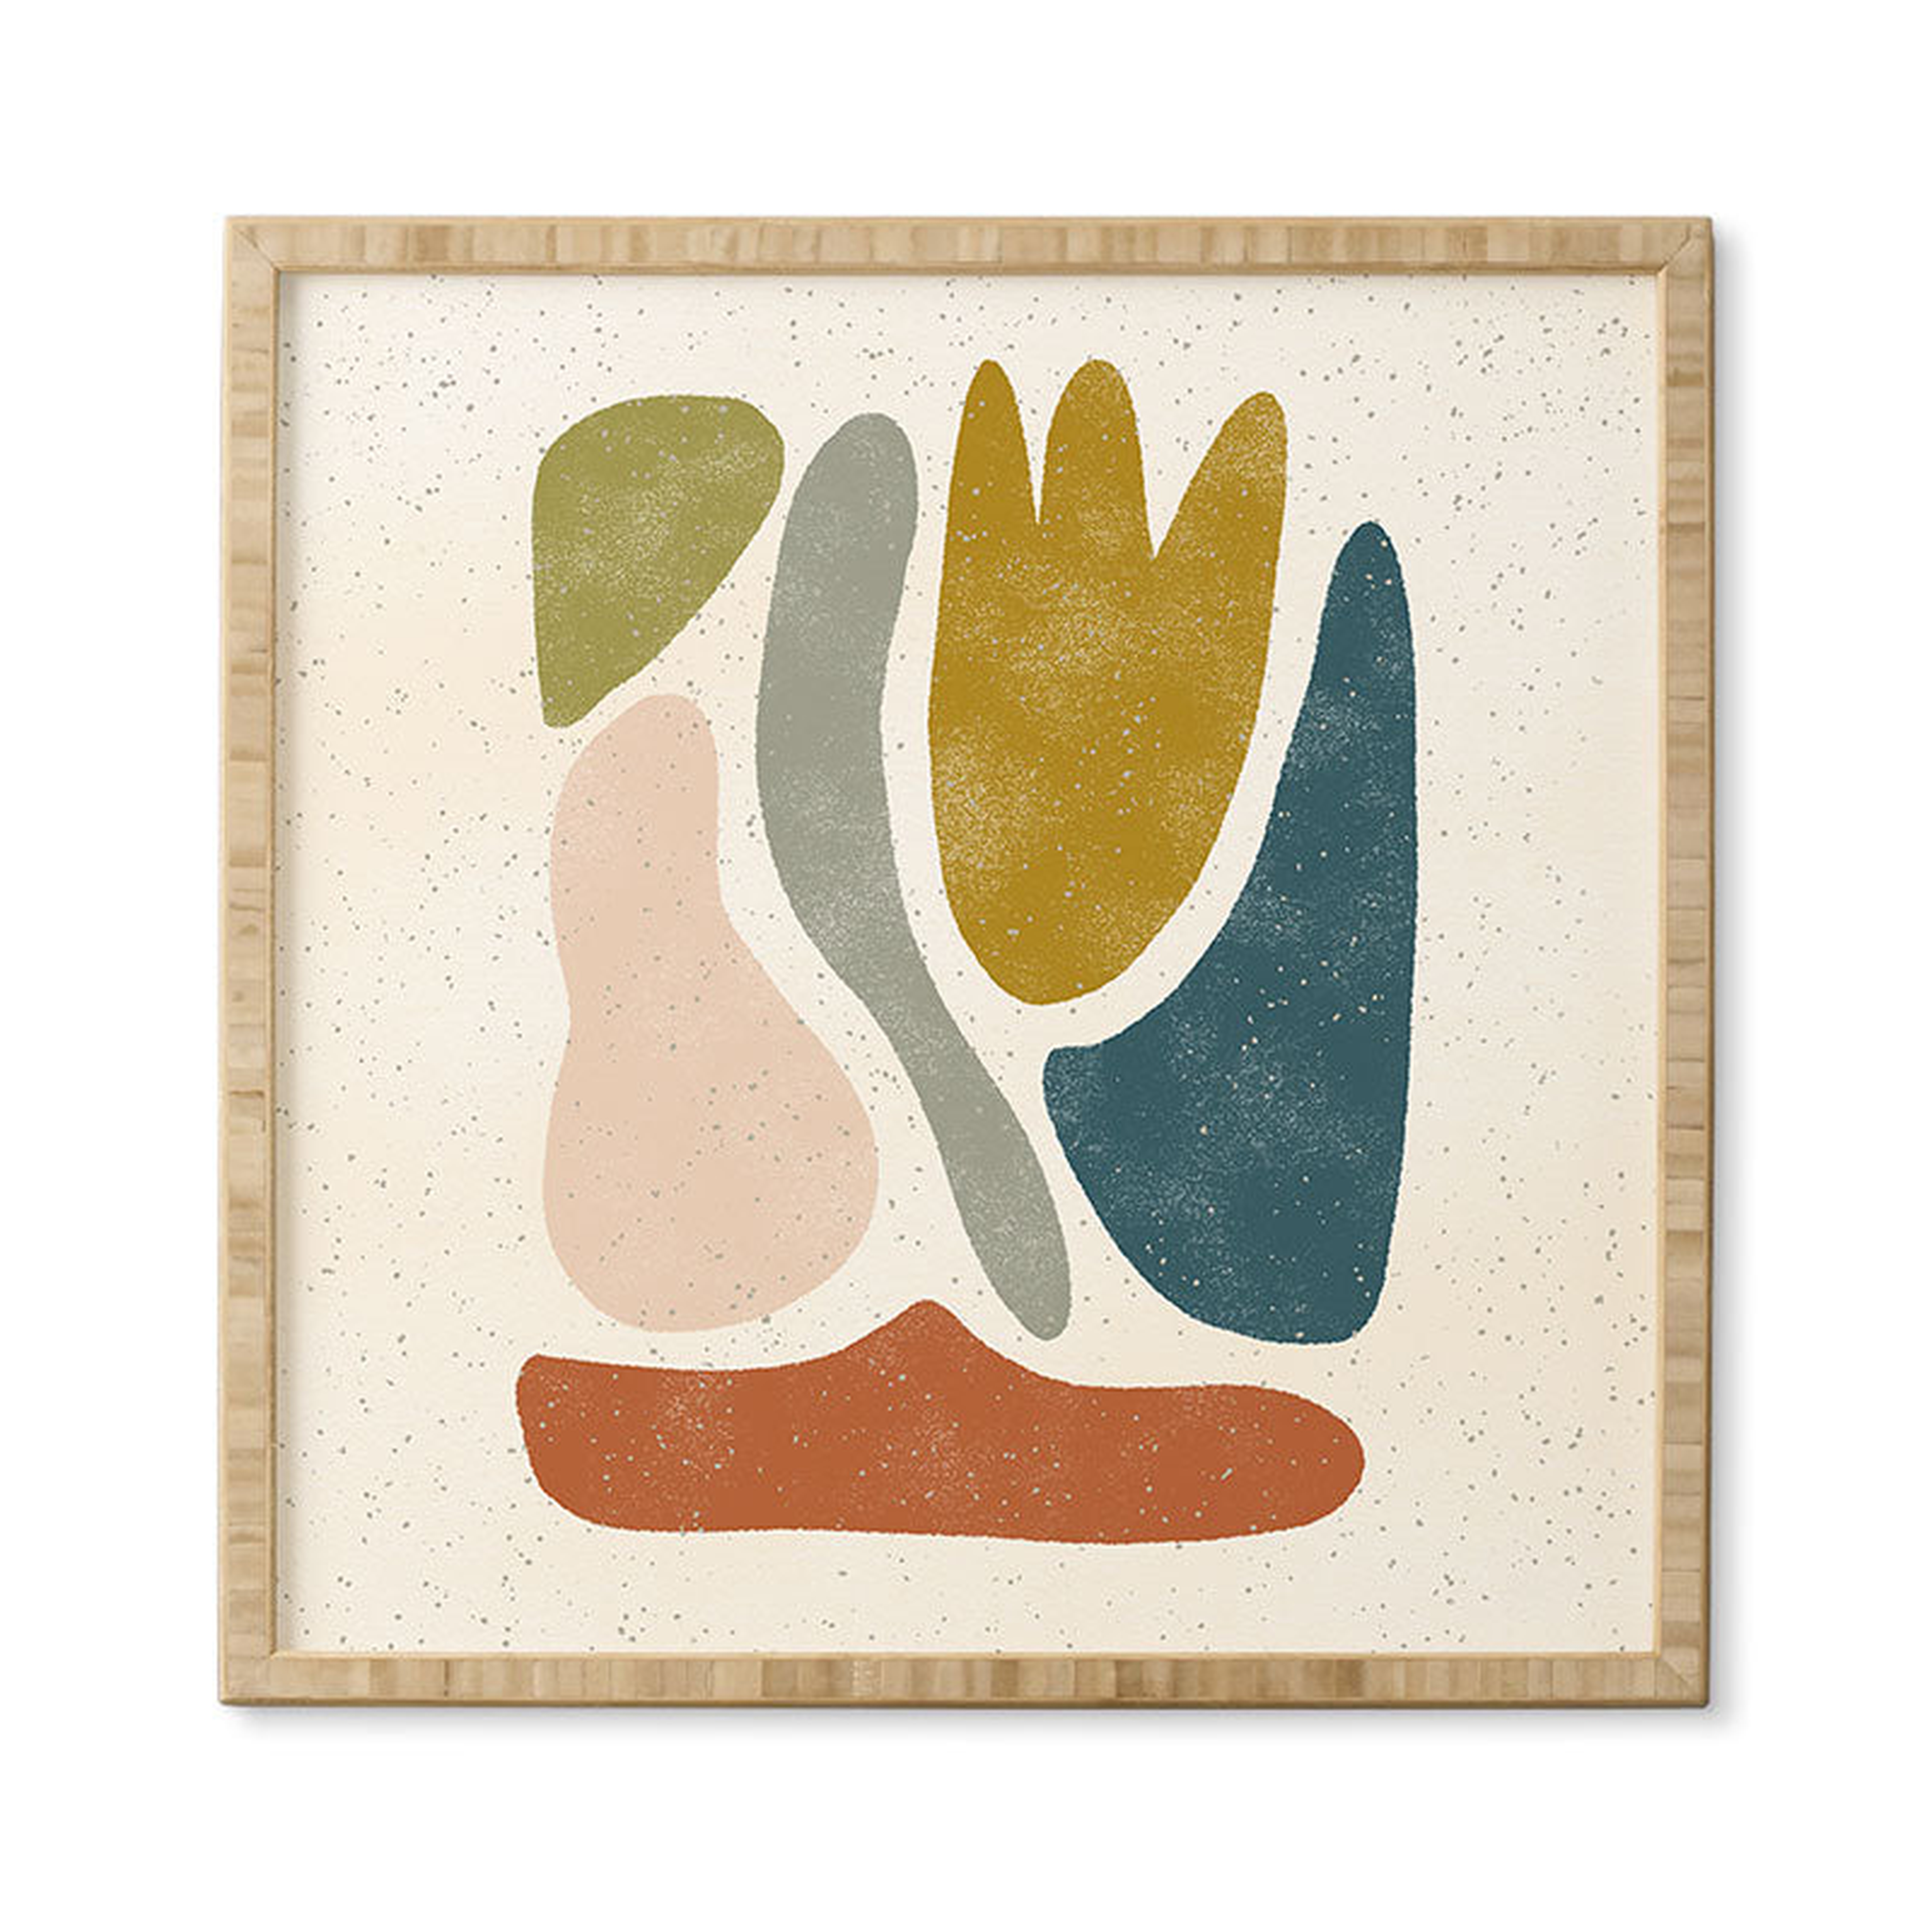 Blob Shapes by Pauline Stanley - Framed Wall Art Bamboo - Wander Print Co.